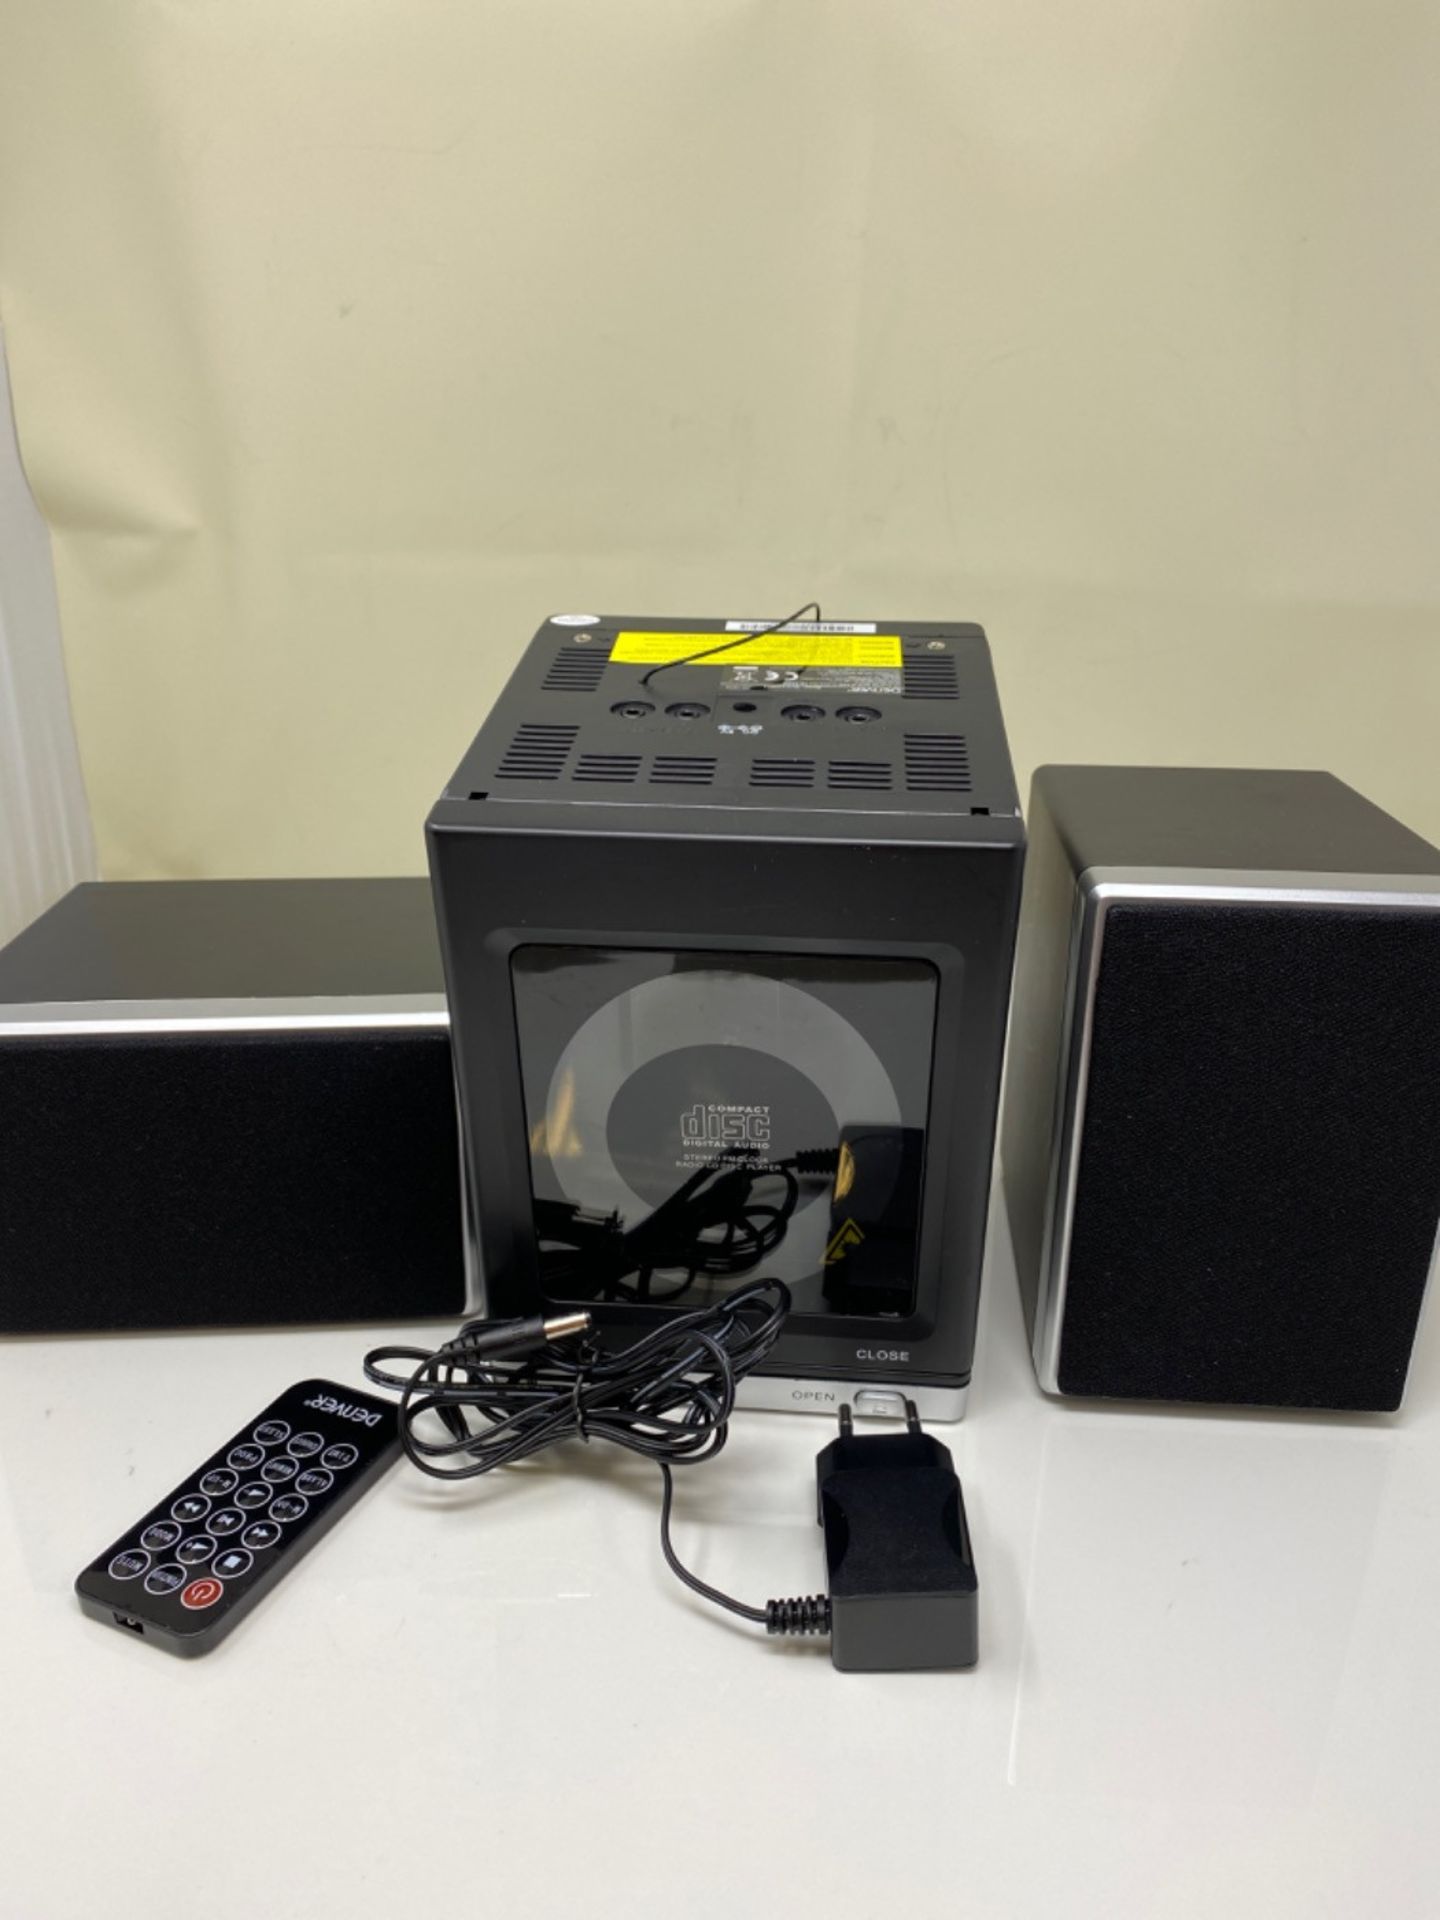 Denver MCA-230 Micro Sound System with PLL-FM Radio, CD Player and AUX-In, Black/Silve - Image 3 of 3